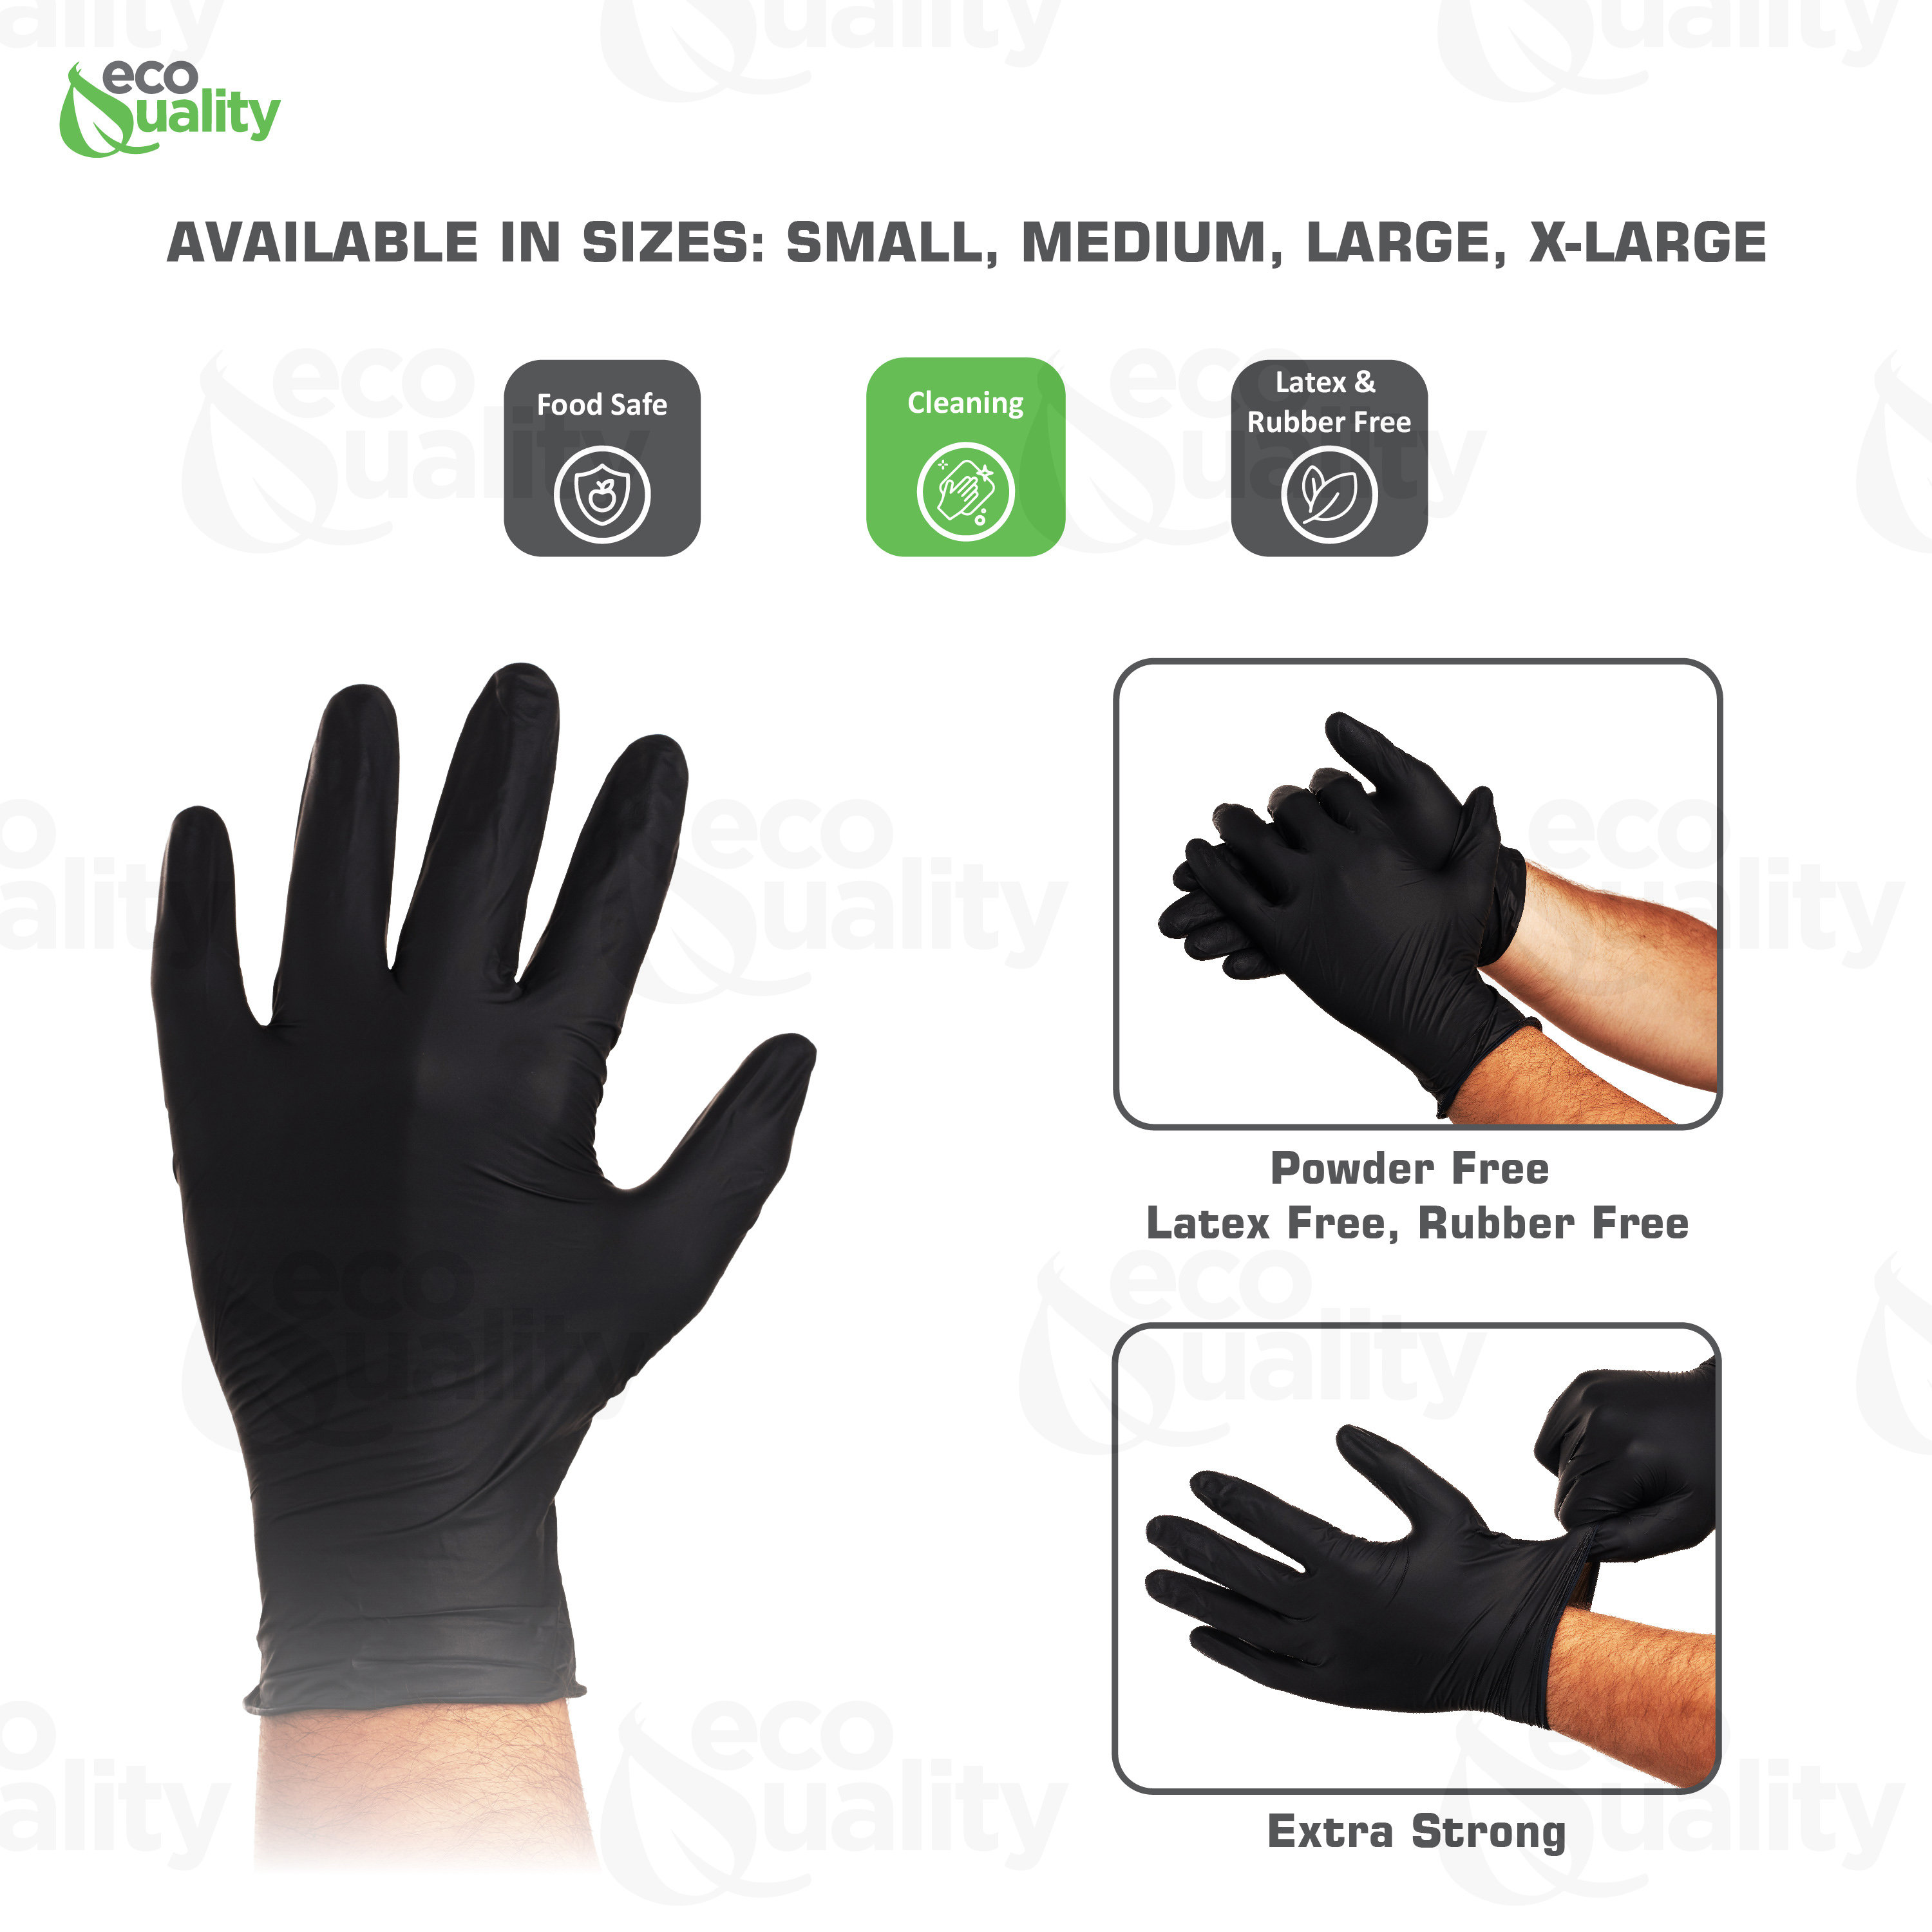 Rubber Orange & Black Heat Resistant Hand Gloves at Rs 300/pair in